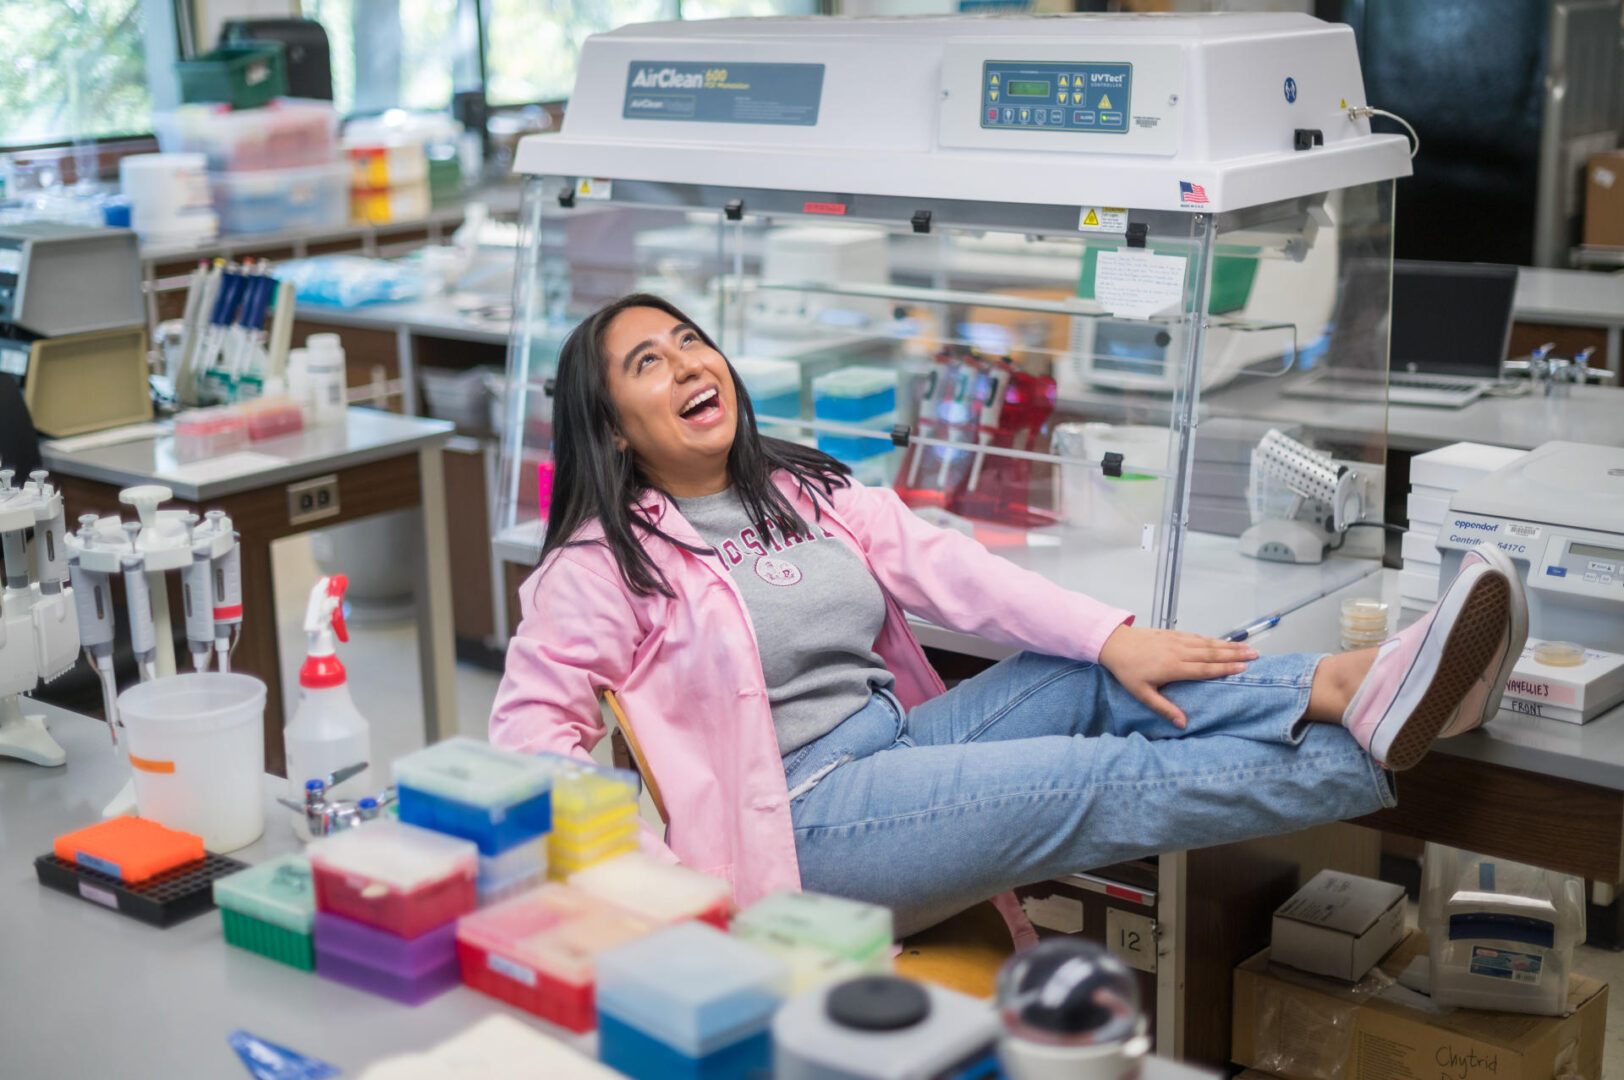 Donning her pink lab coat and pink shoes, Nayellie Barragan-Mejia sits back on a chair with her feet up on a desk as she laughs.